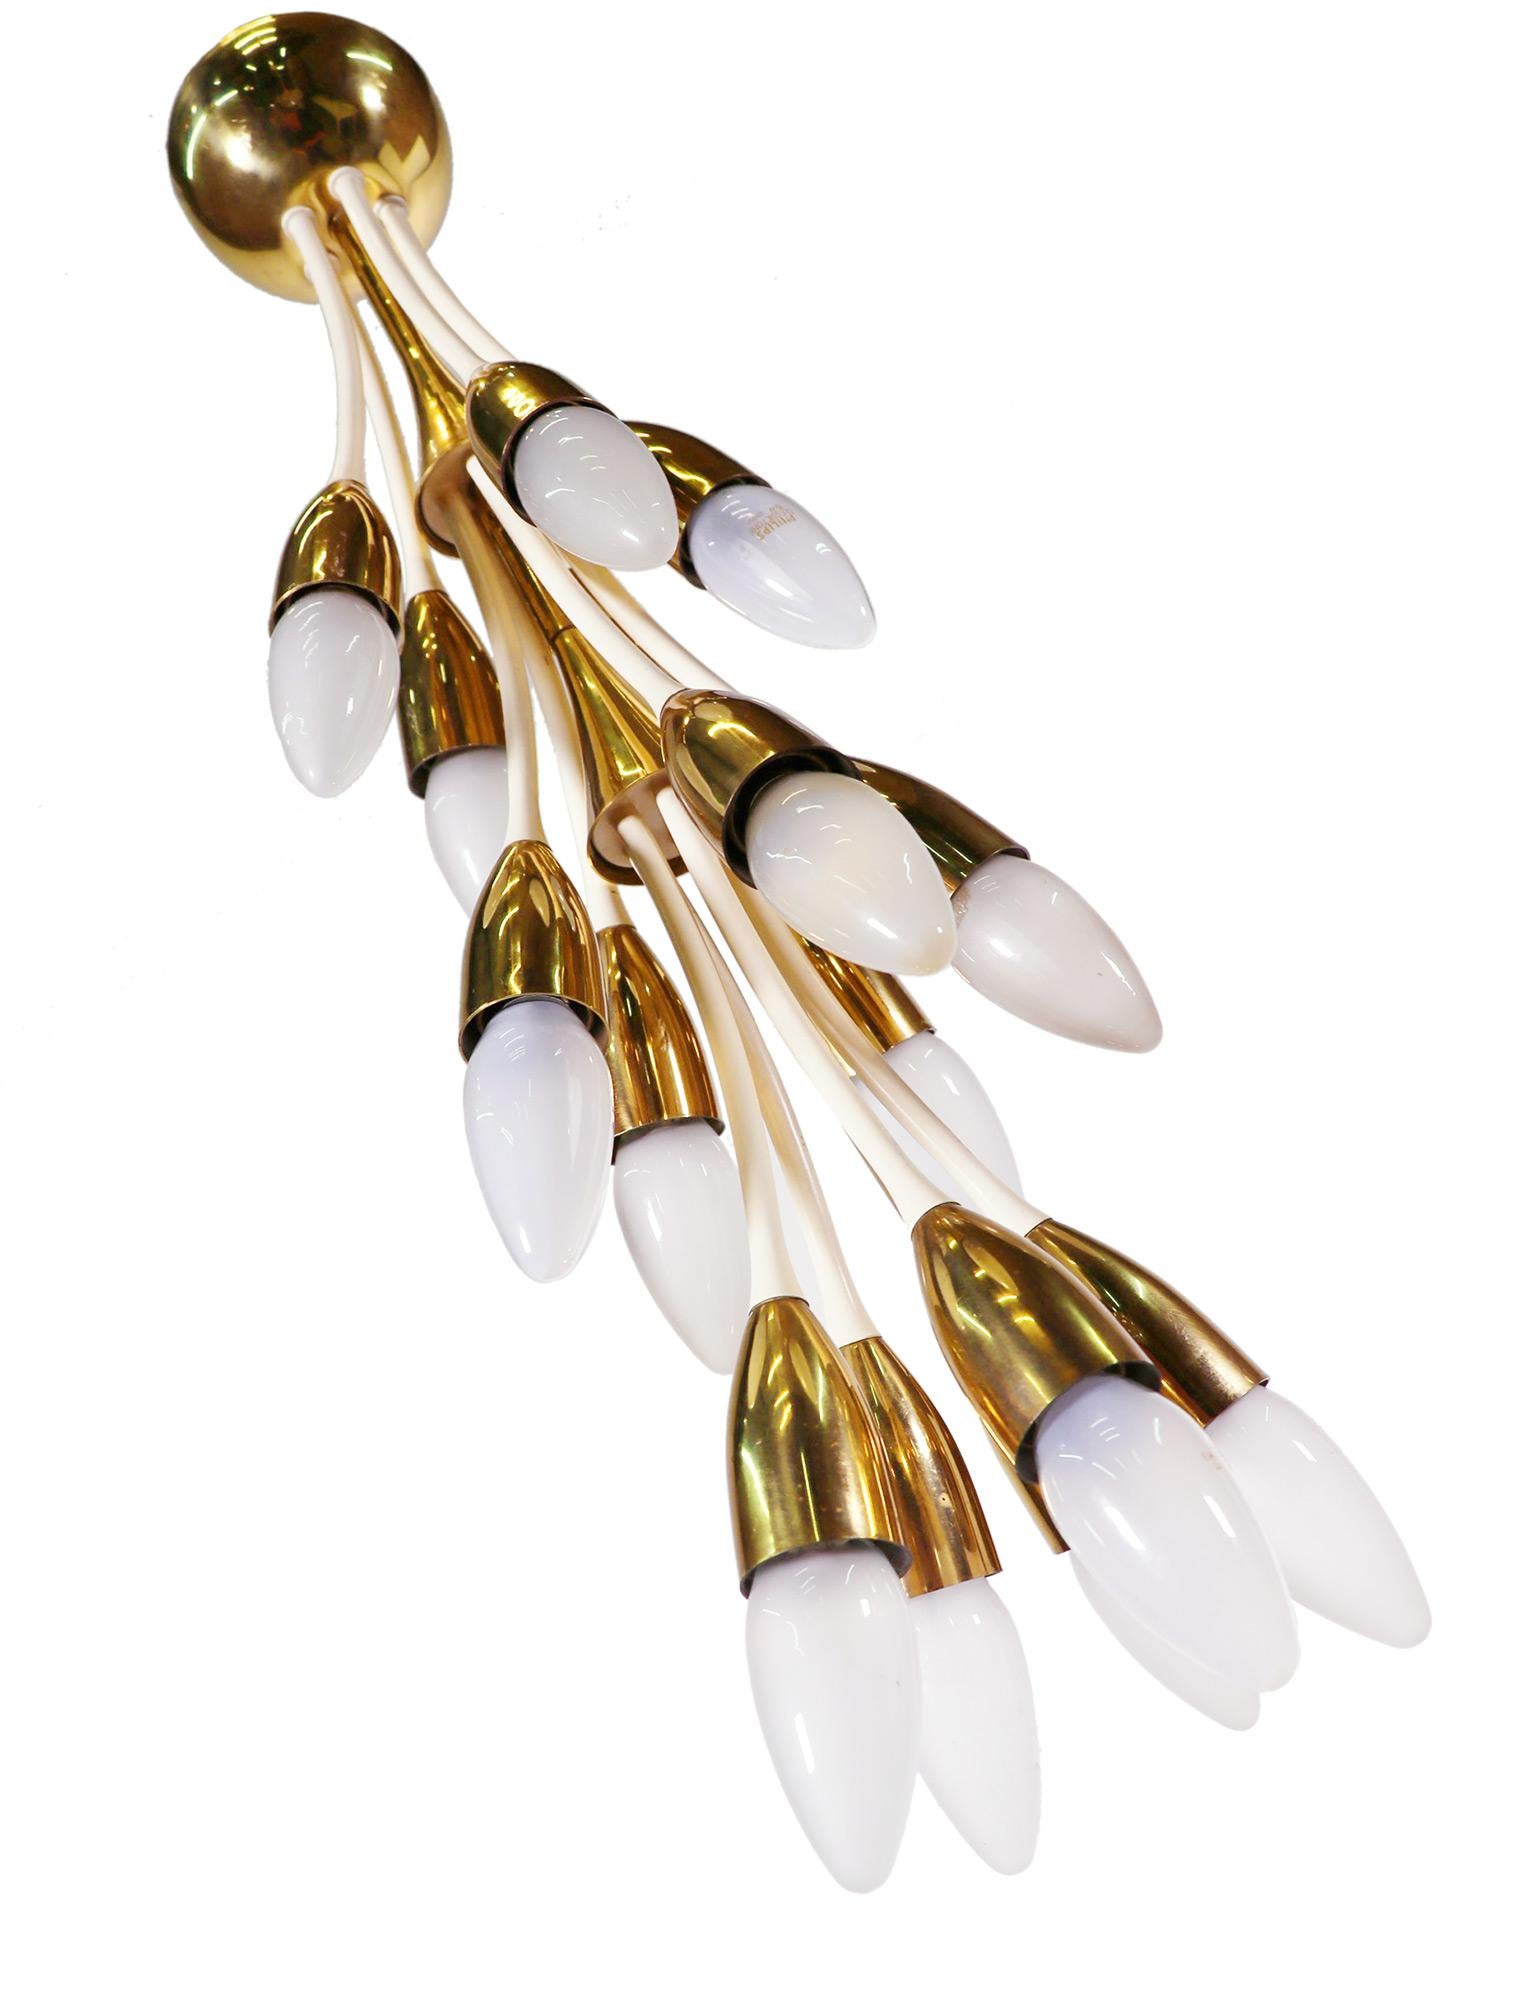 Impressive midcentury twelve-light chandelier with enamel curved arms and polished brass cones, attached to a flushed canopy mount. 
Manufactured by Vereinigte Werkstätten Munich in Germany in the 1950s. 

Lighting: takes twelve small Edison E14